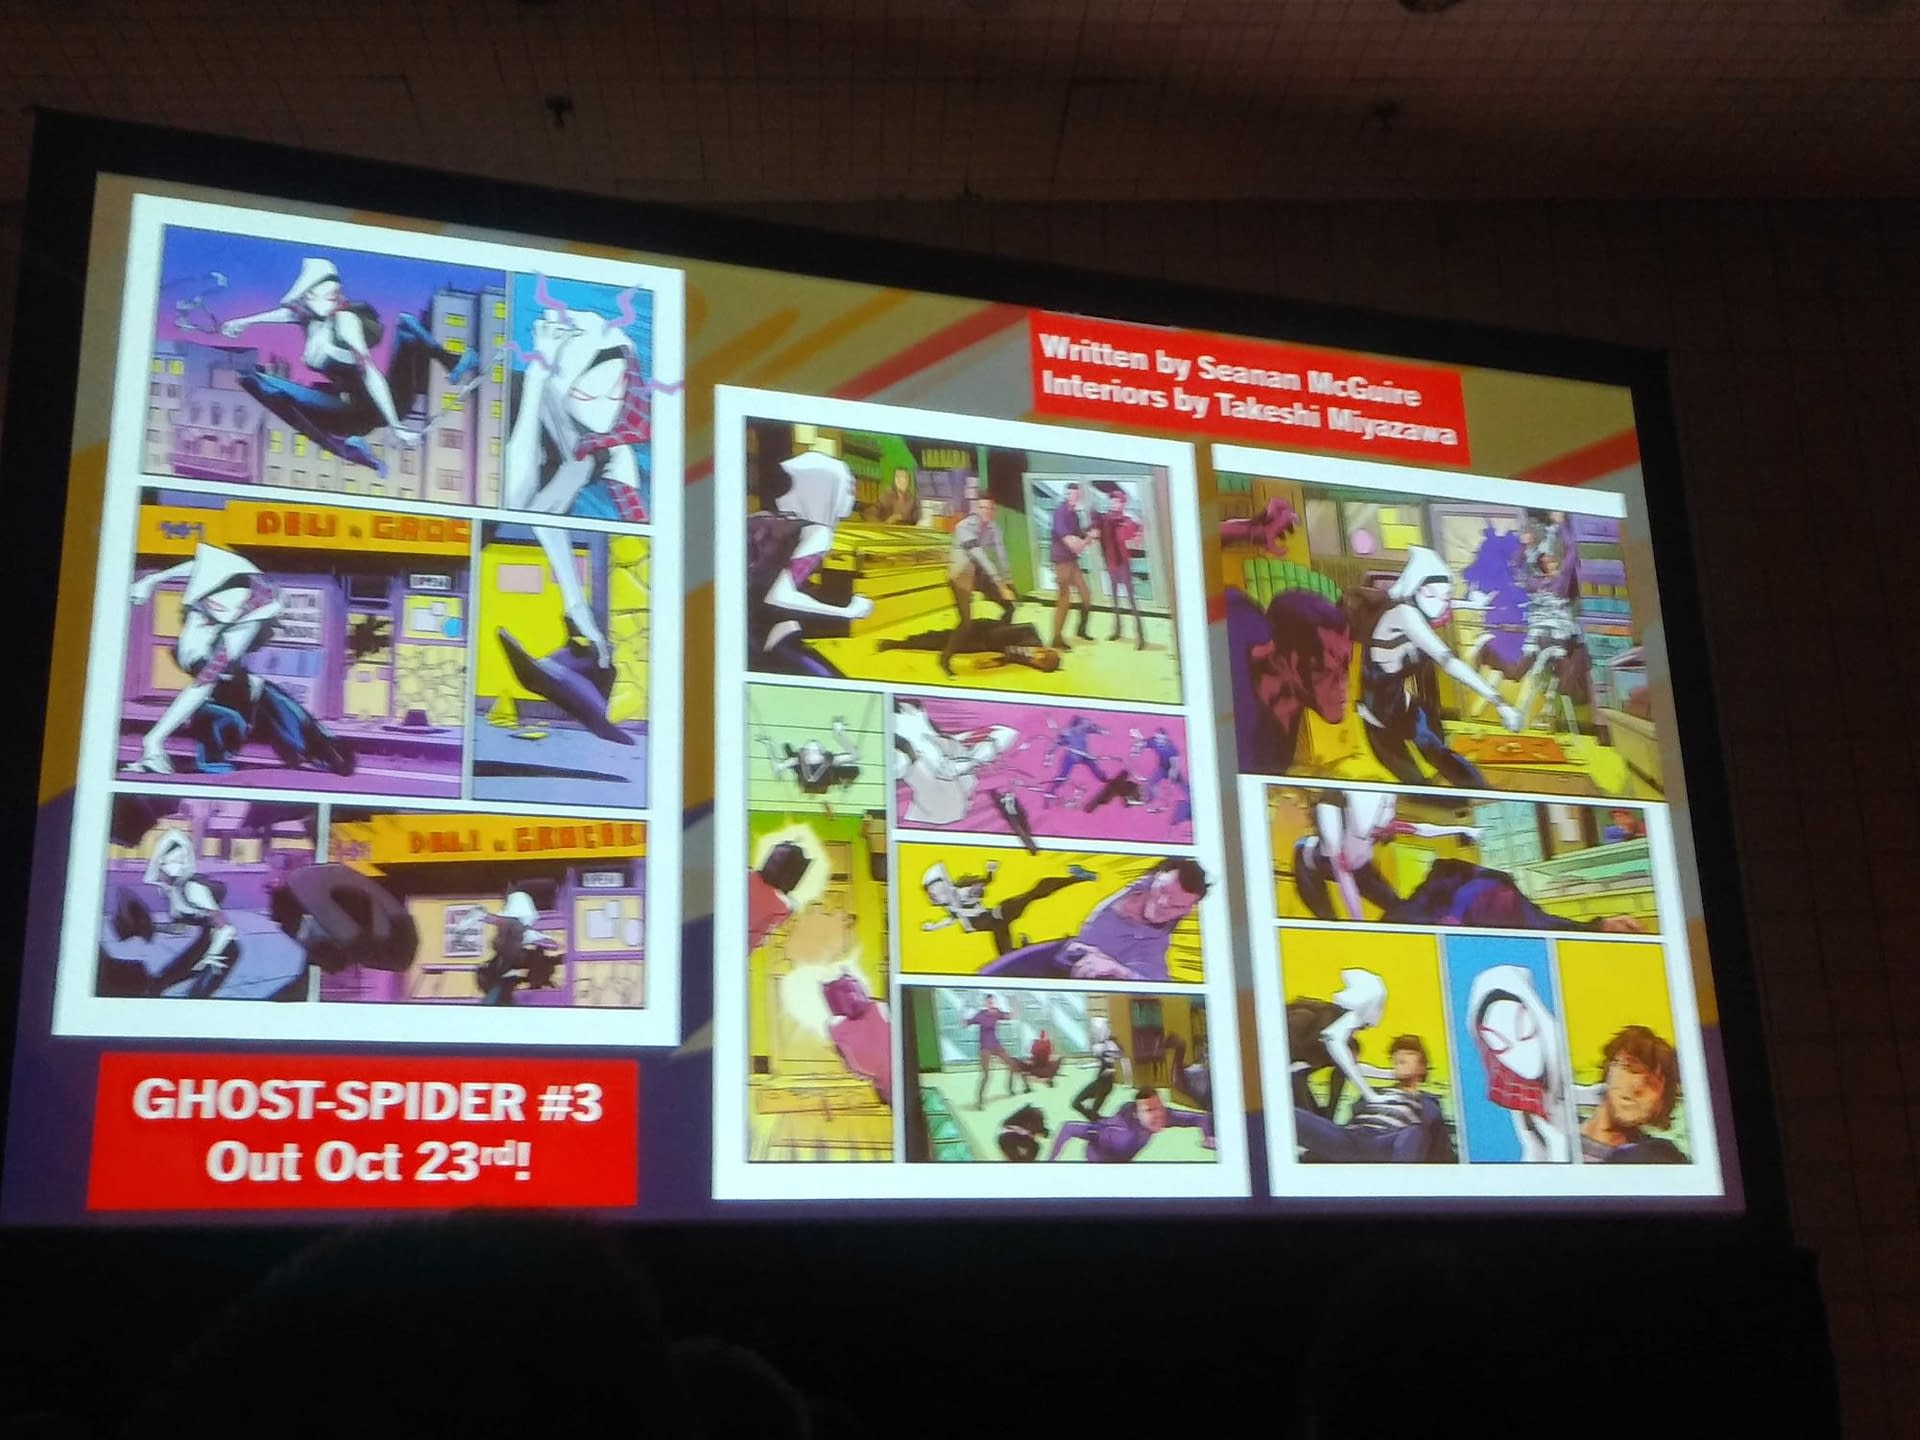 Mary Jane and Mysterio Sitting in a Tree K-I-S-S-I-N-G?! Art from the NYCC Spider-Man Panel